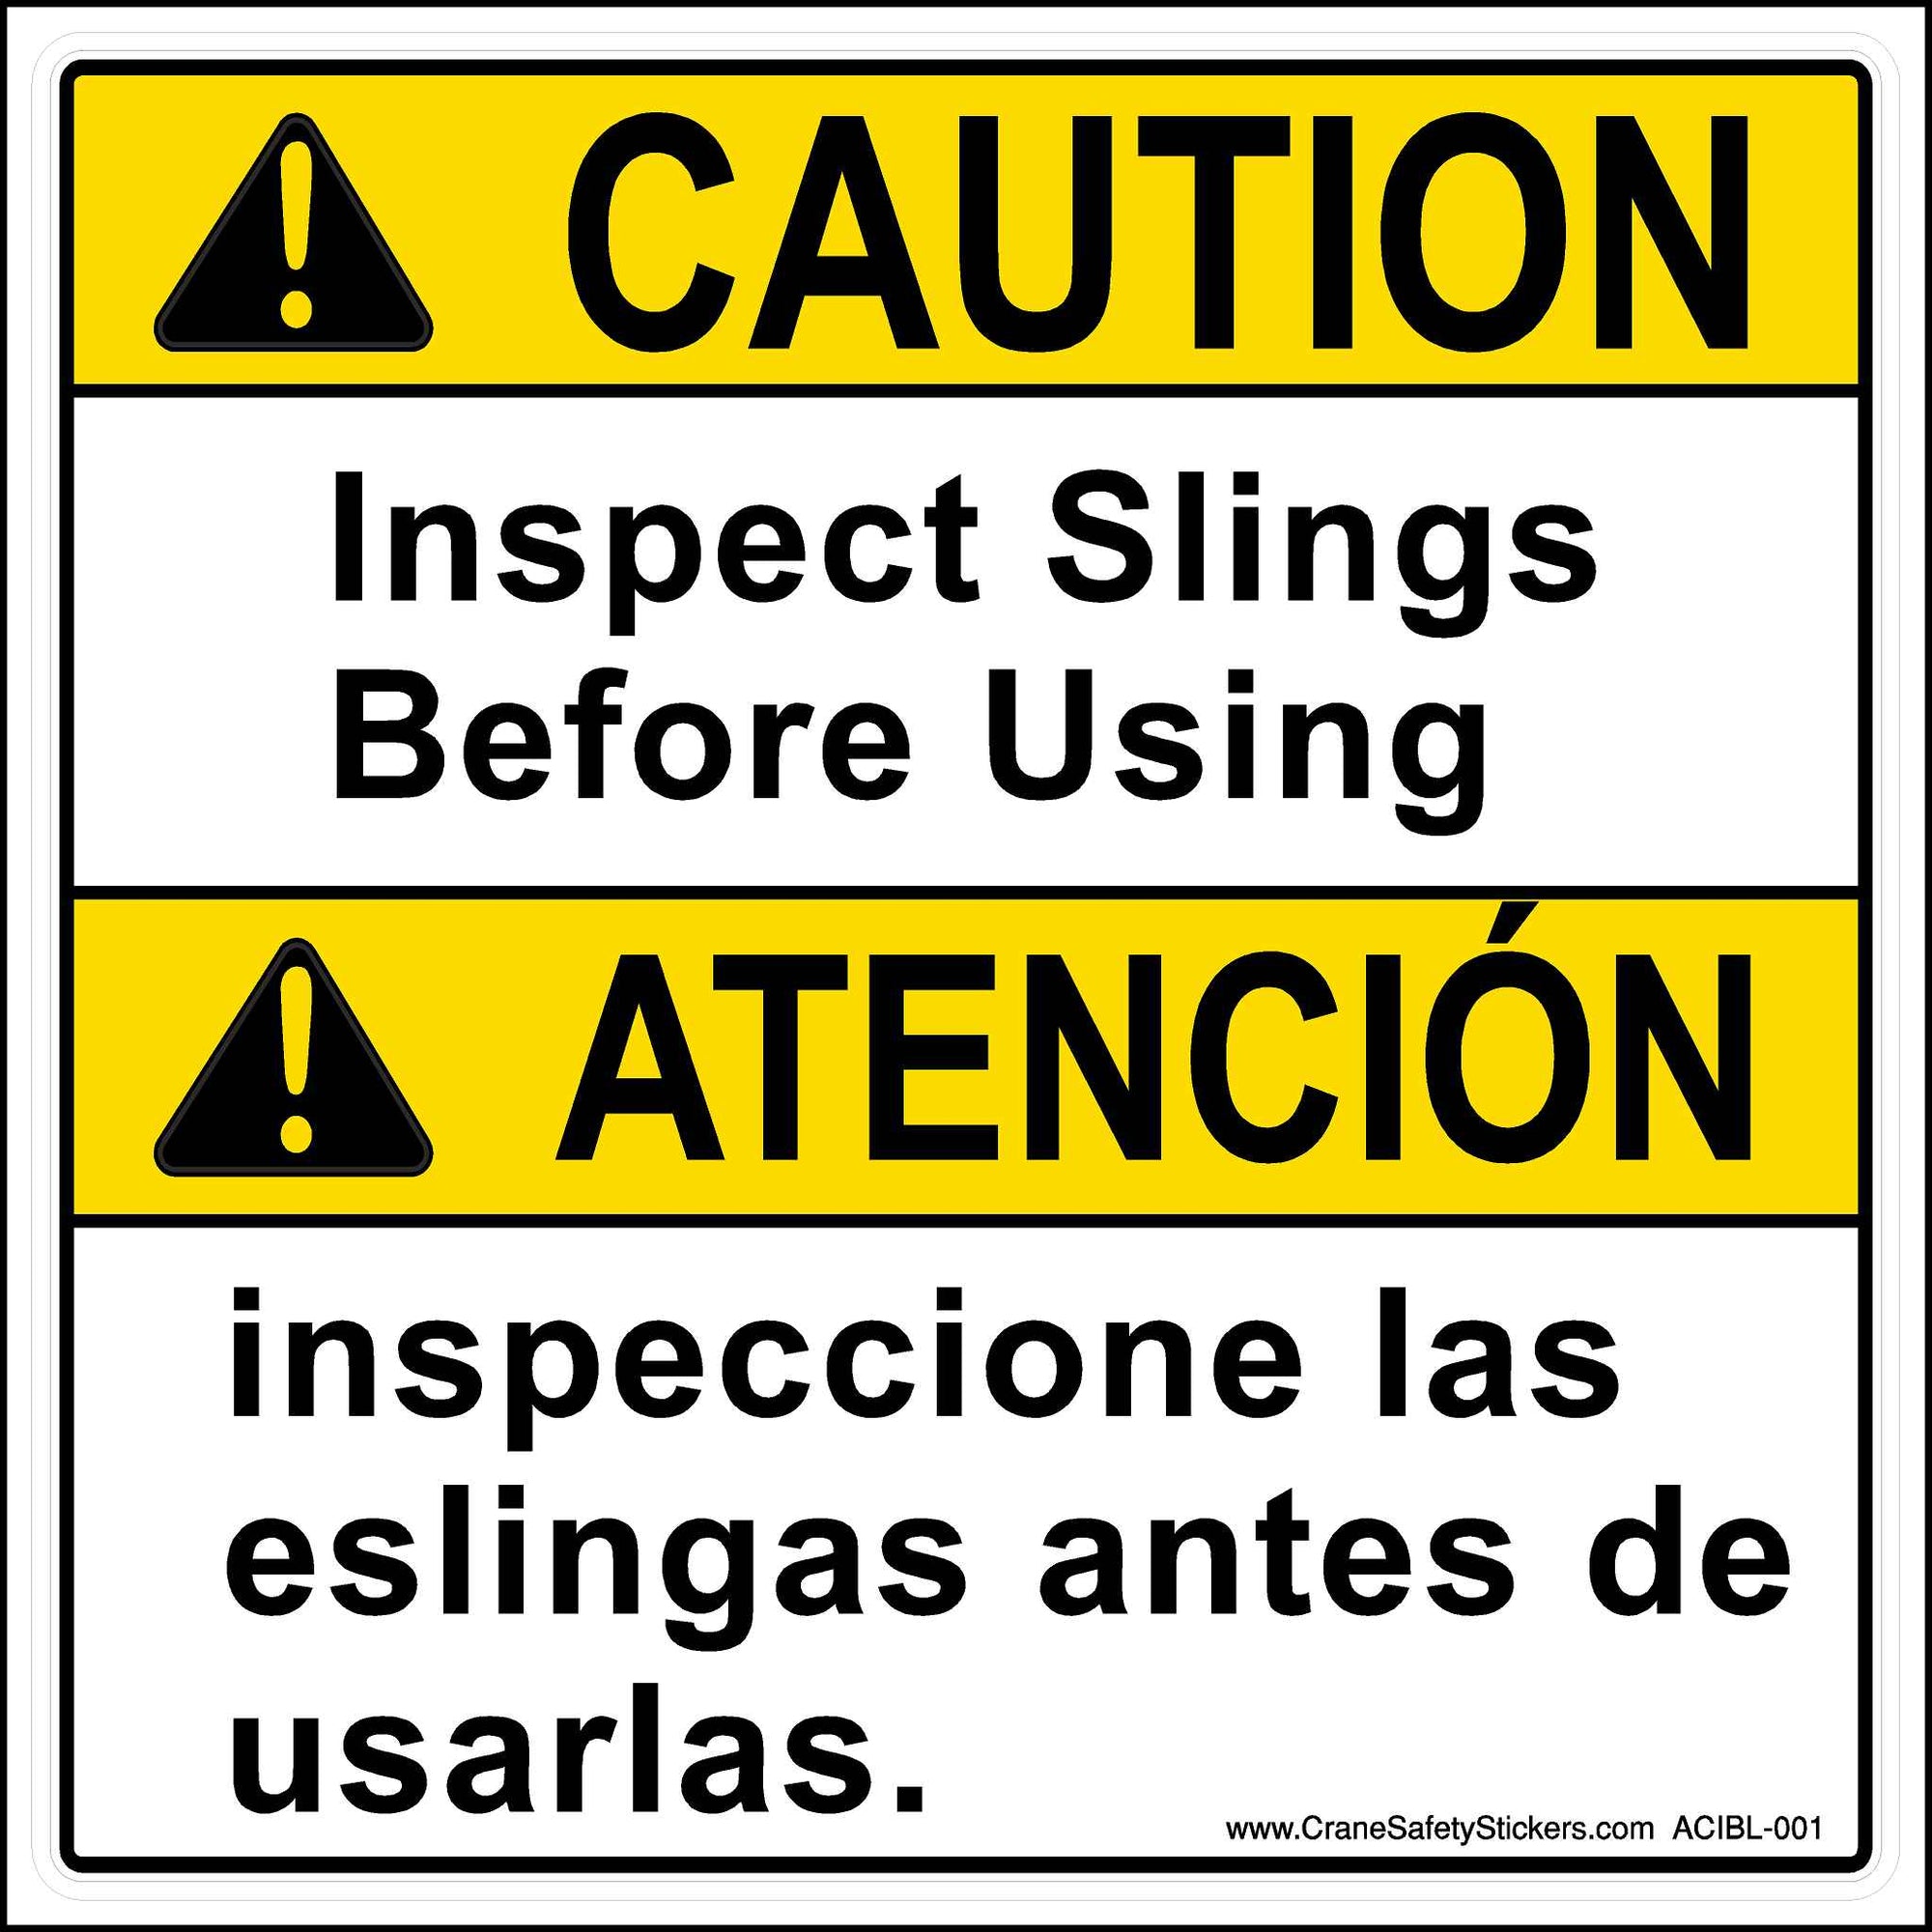 This Bilingual Overhead Crane Safety Sticker is printed with, Caution Inspect Sling Before Using inspeccione las eslingas antes de usarlas.